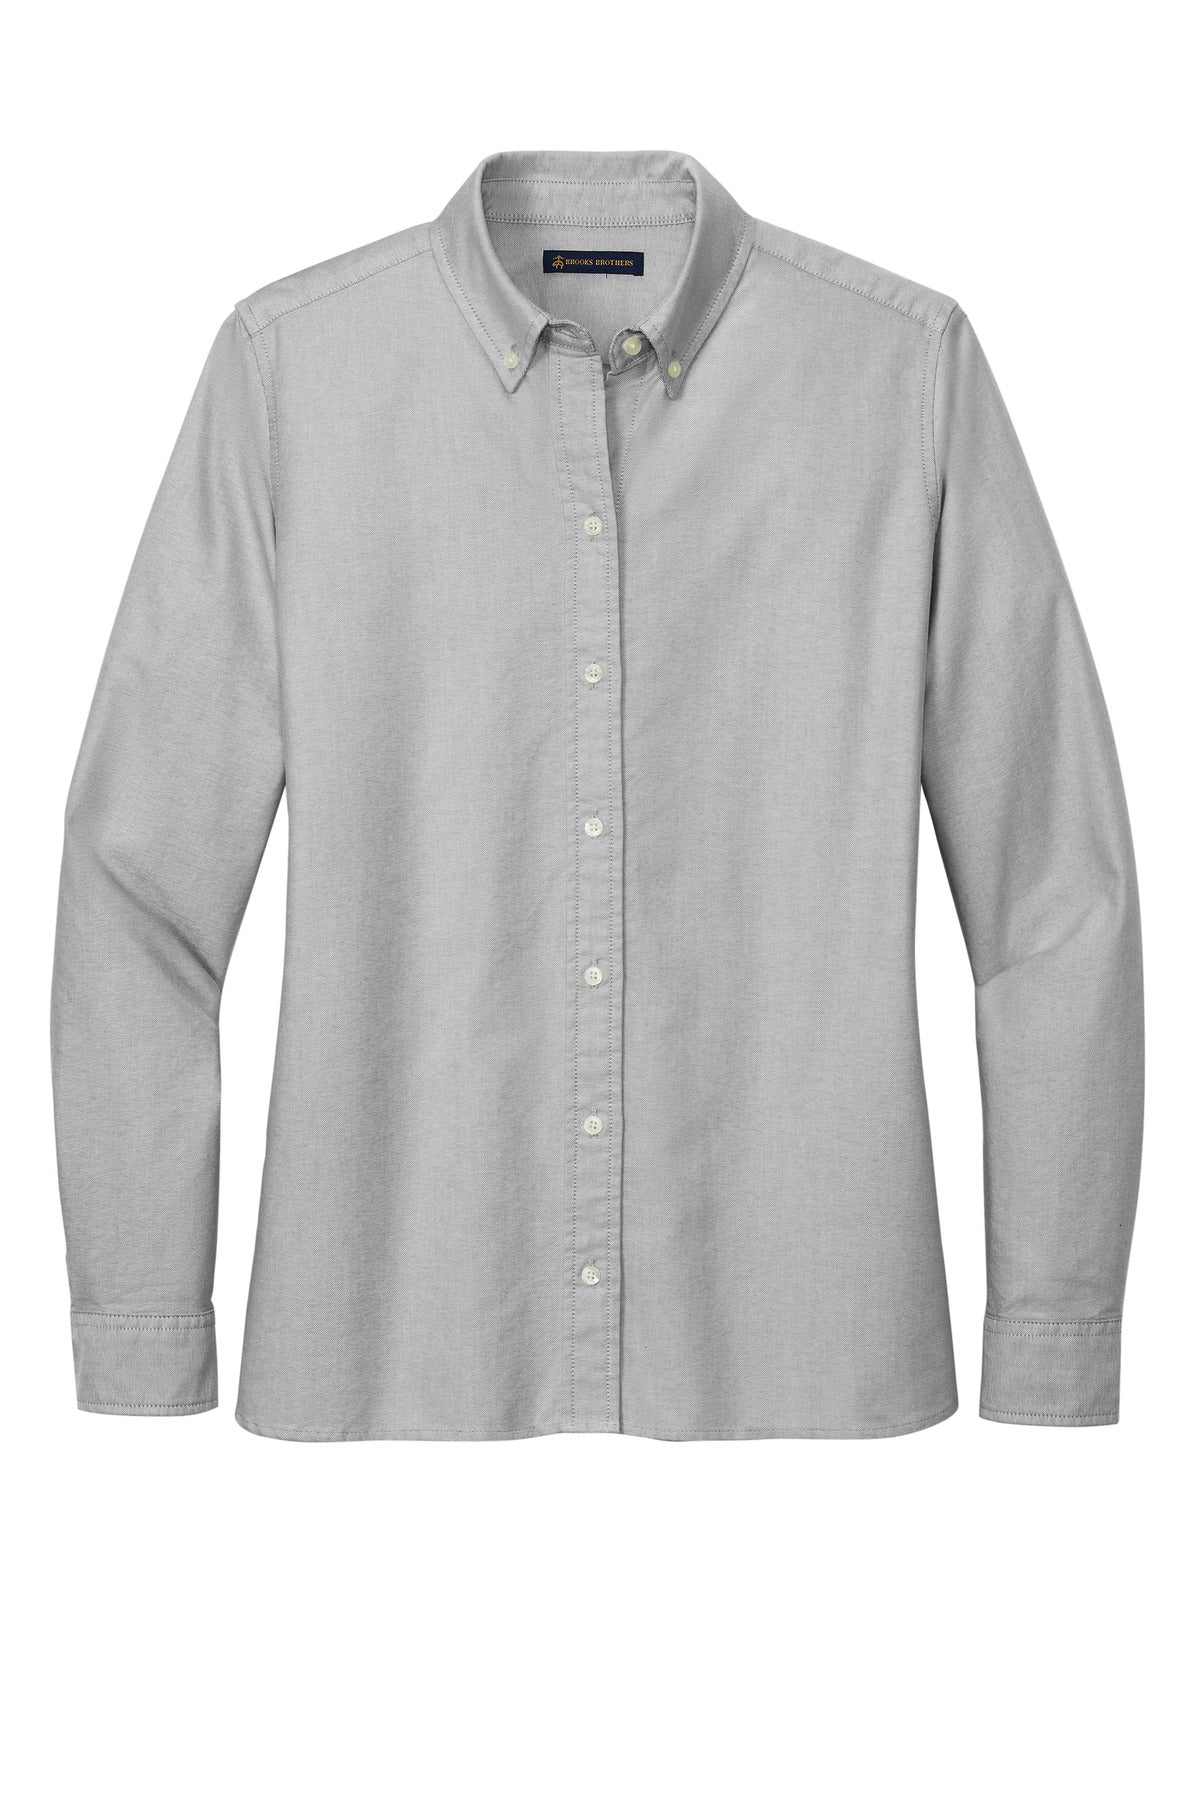 Brooks Brothers Women's Casual Oxford Cloth Shirt BB18005